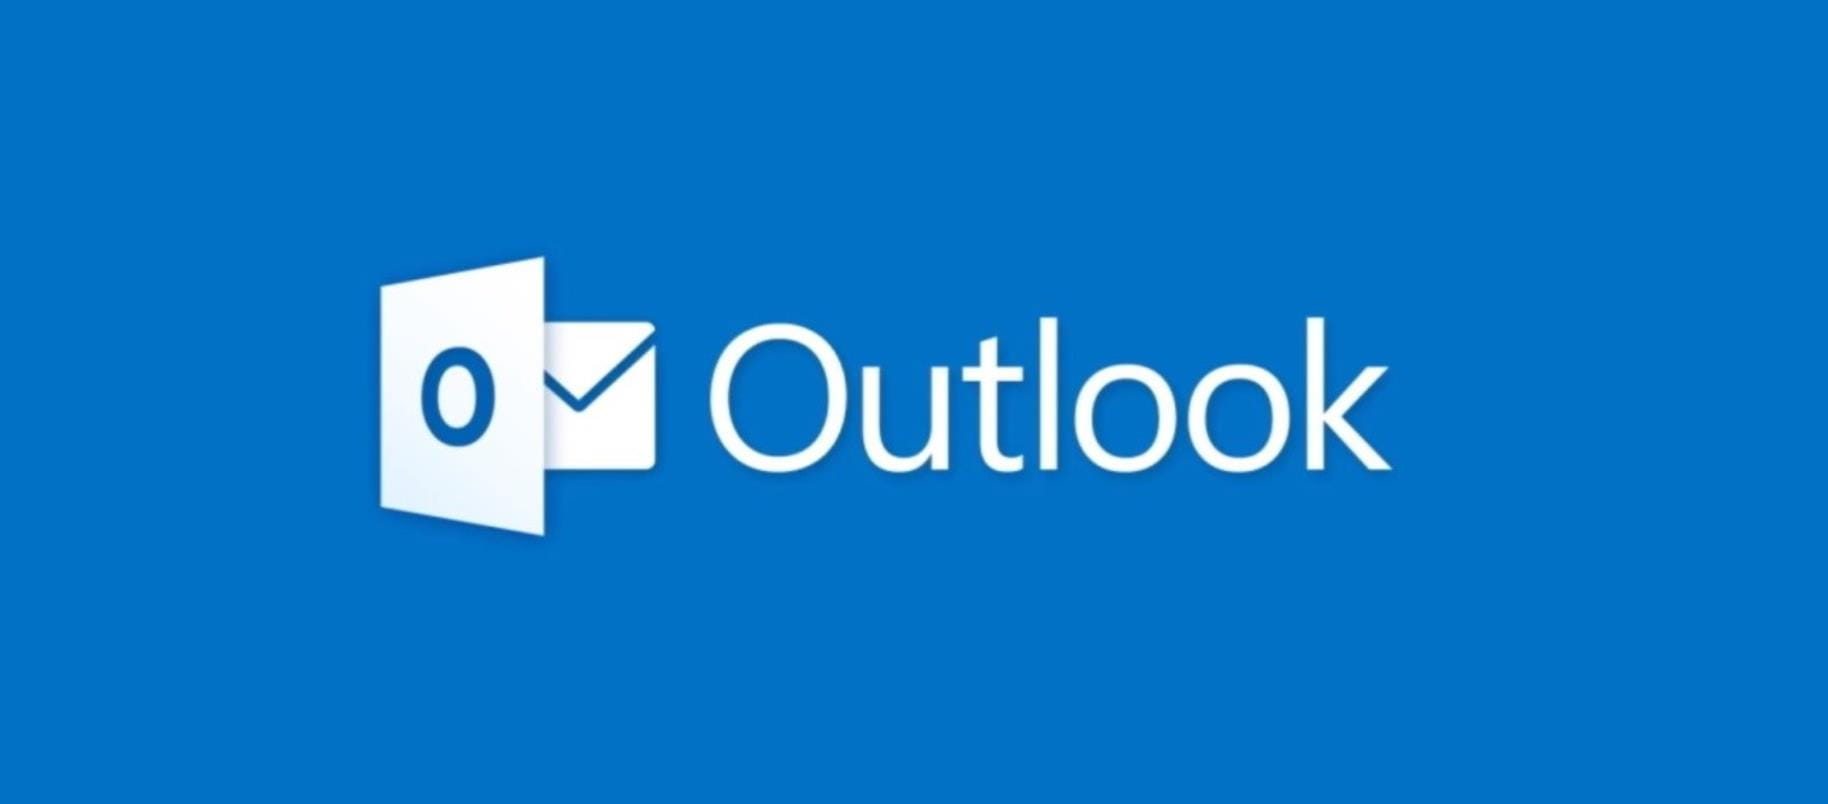 How to delete Outlook account